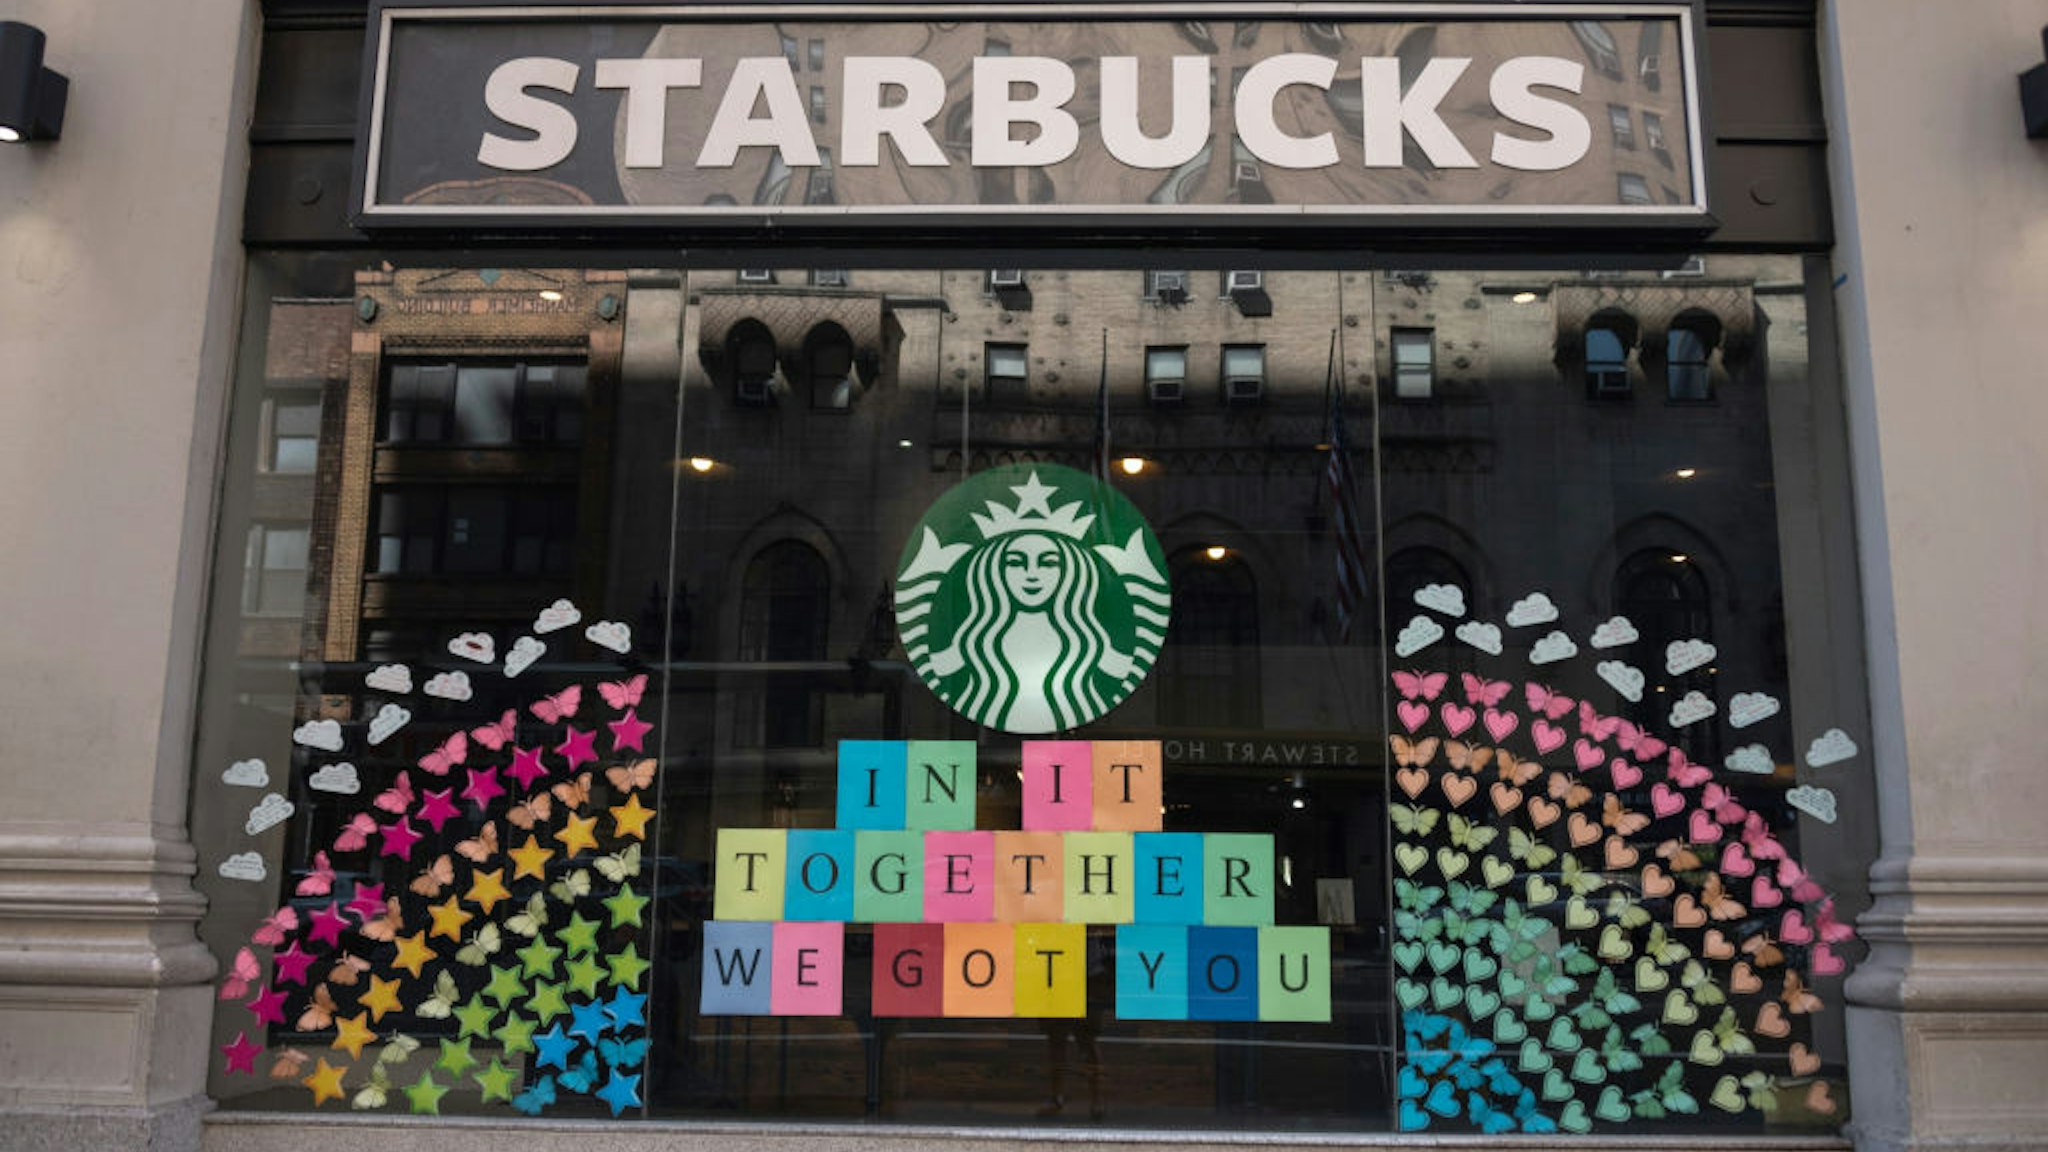 NEW YORK, NEW YORK - JUNE 21: The view of a Starbucks coffee shop displaying pride colors on June 21, 2020 in New York City. Due to the ongoing Coronavirus pandemic, this year's pride march had to be canceled over health concerns. The annual event, which sees millions of attendees, marks it's 50th anniversary since the first march following the Stonewall Inn riots. (Photo by Alexi Rosenfeld/Getty Images)